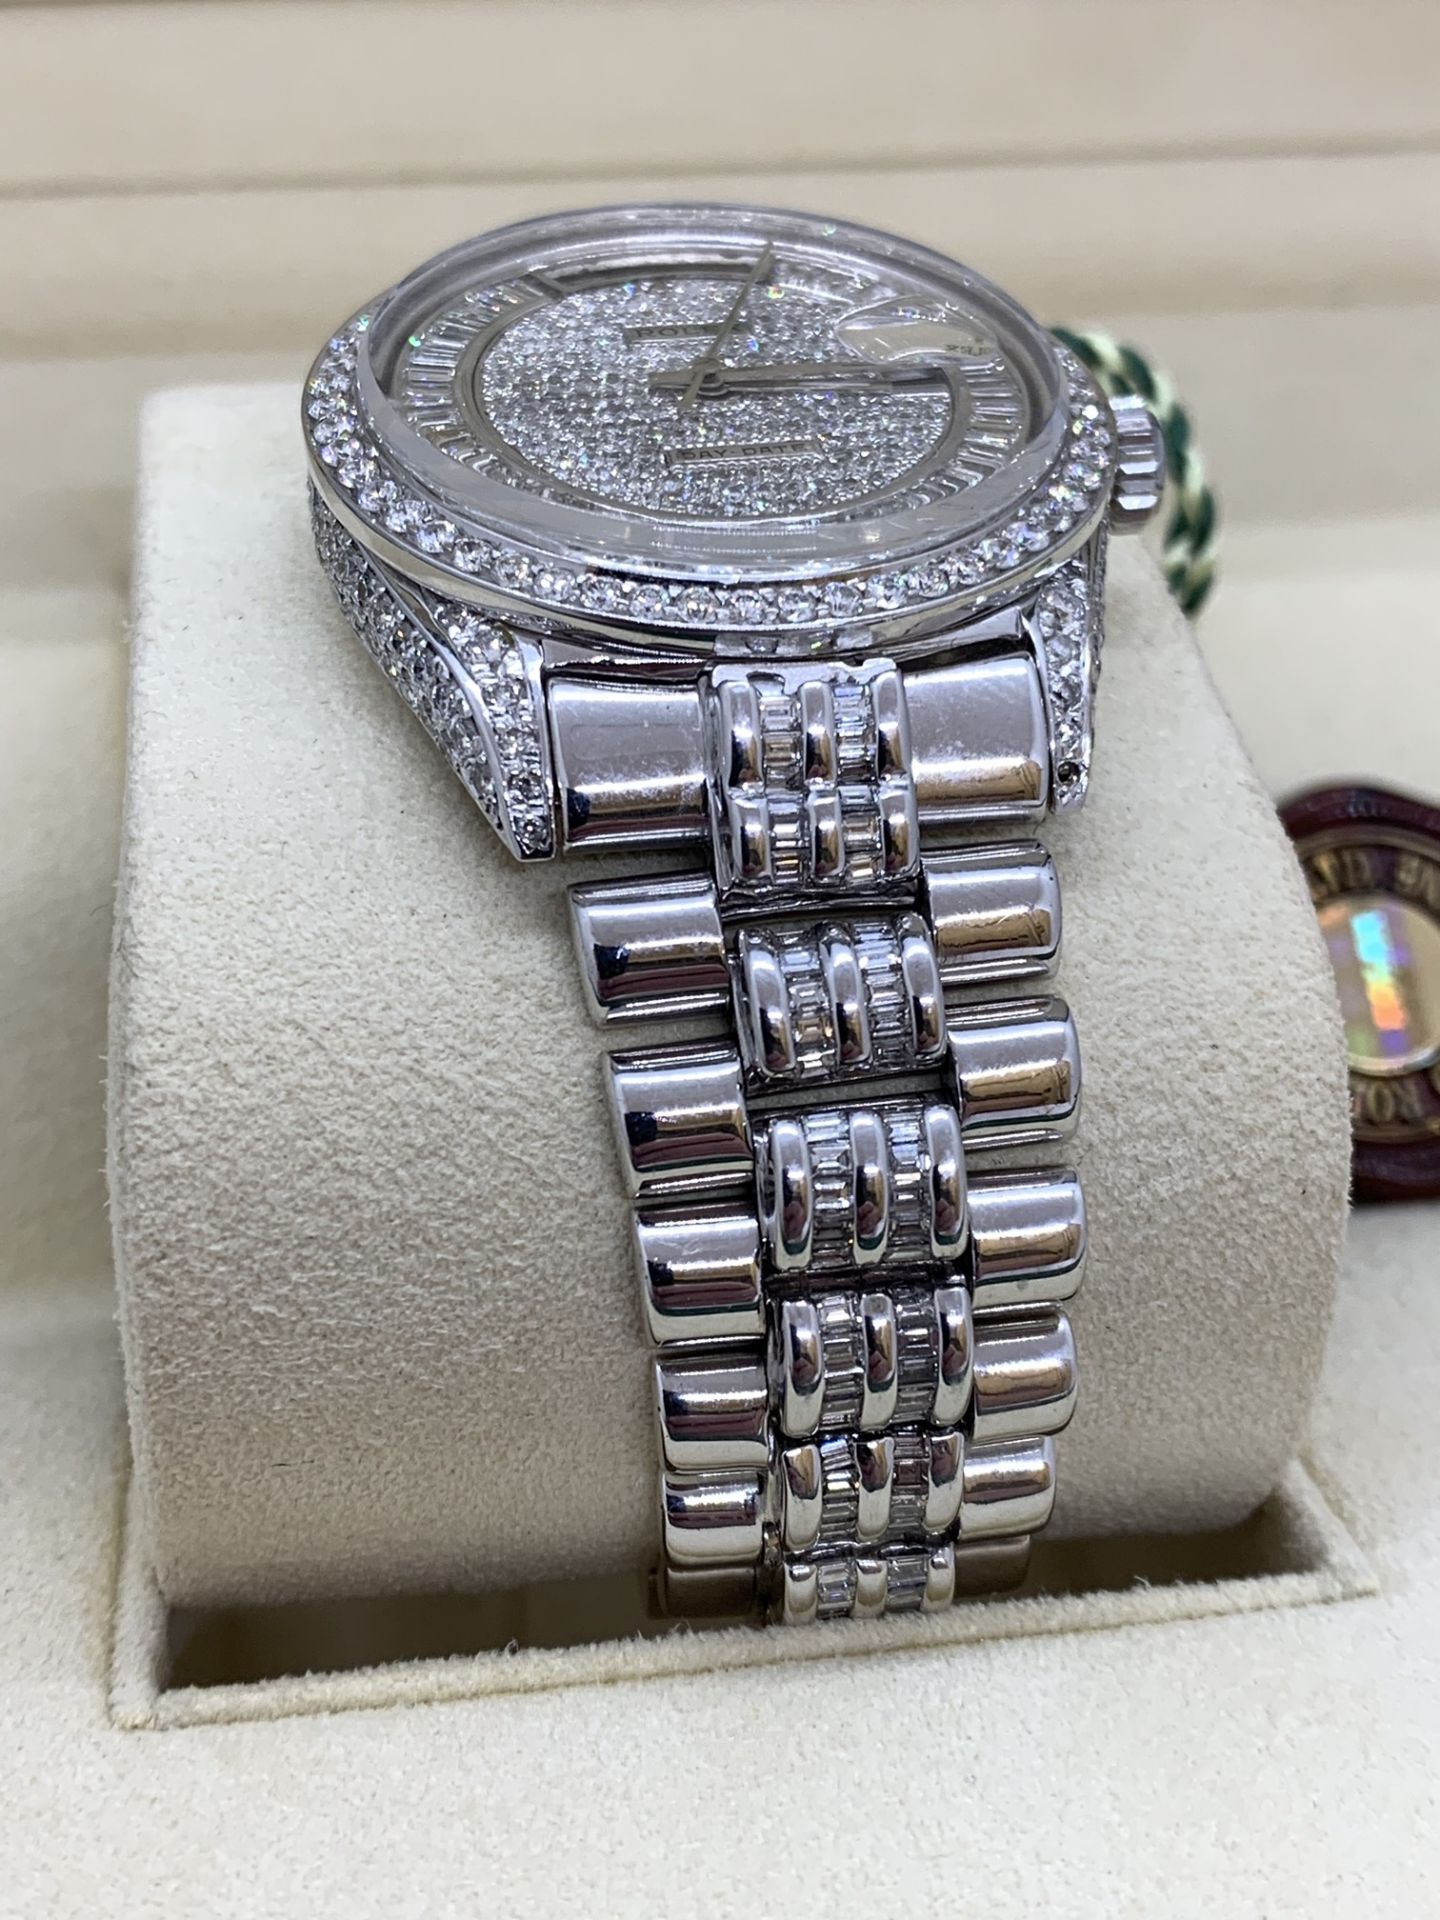 36mm DIAMOND SET DAY-DATE WATCH MARKED ROLEX SET IN WHITE METAL (TESTED AS GOLD) - Image 7 of 15